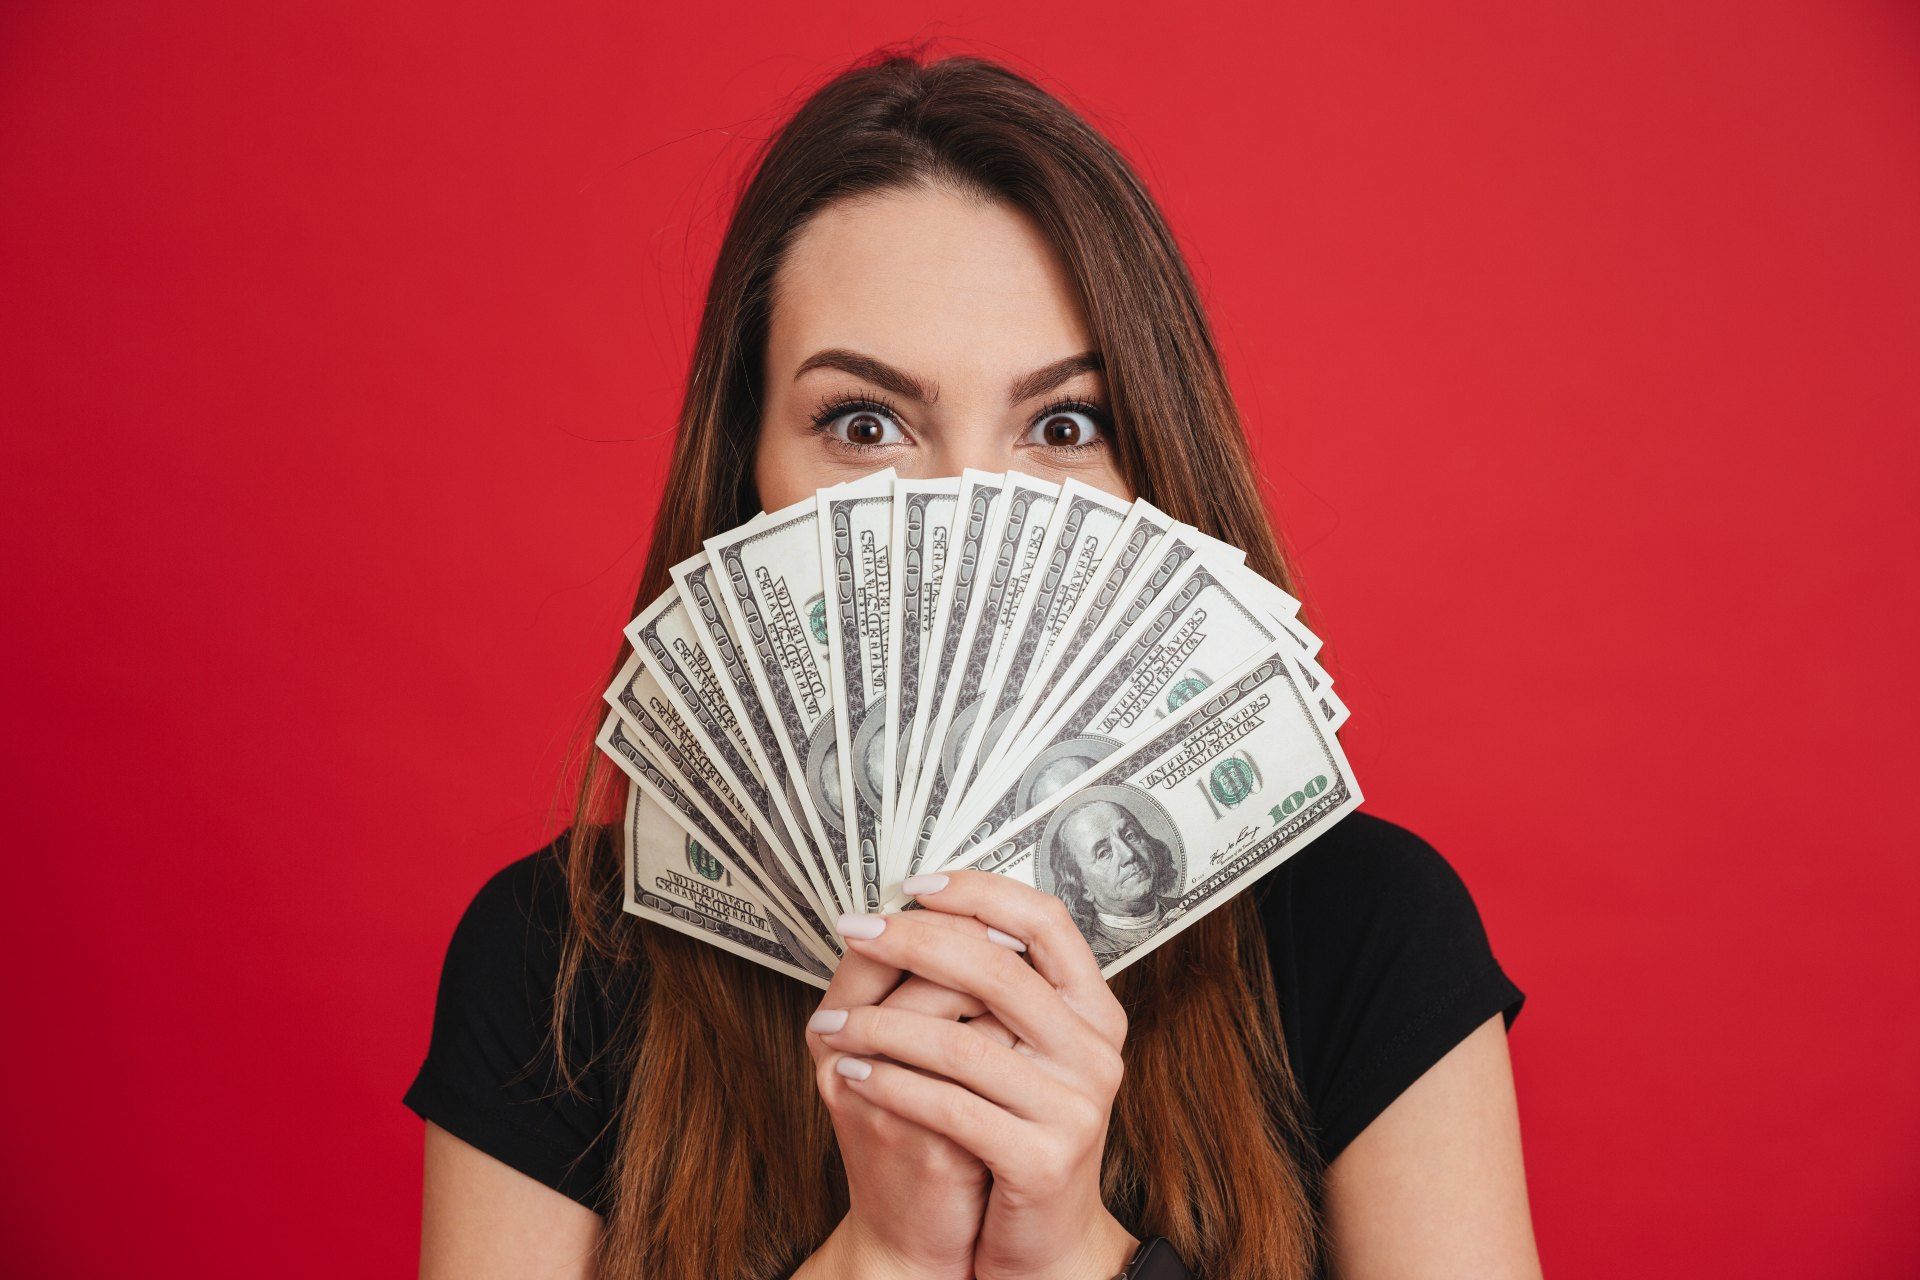 A woman in a black shirt holds fanned-out cash in front of the lower half of her face against a red background